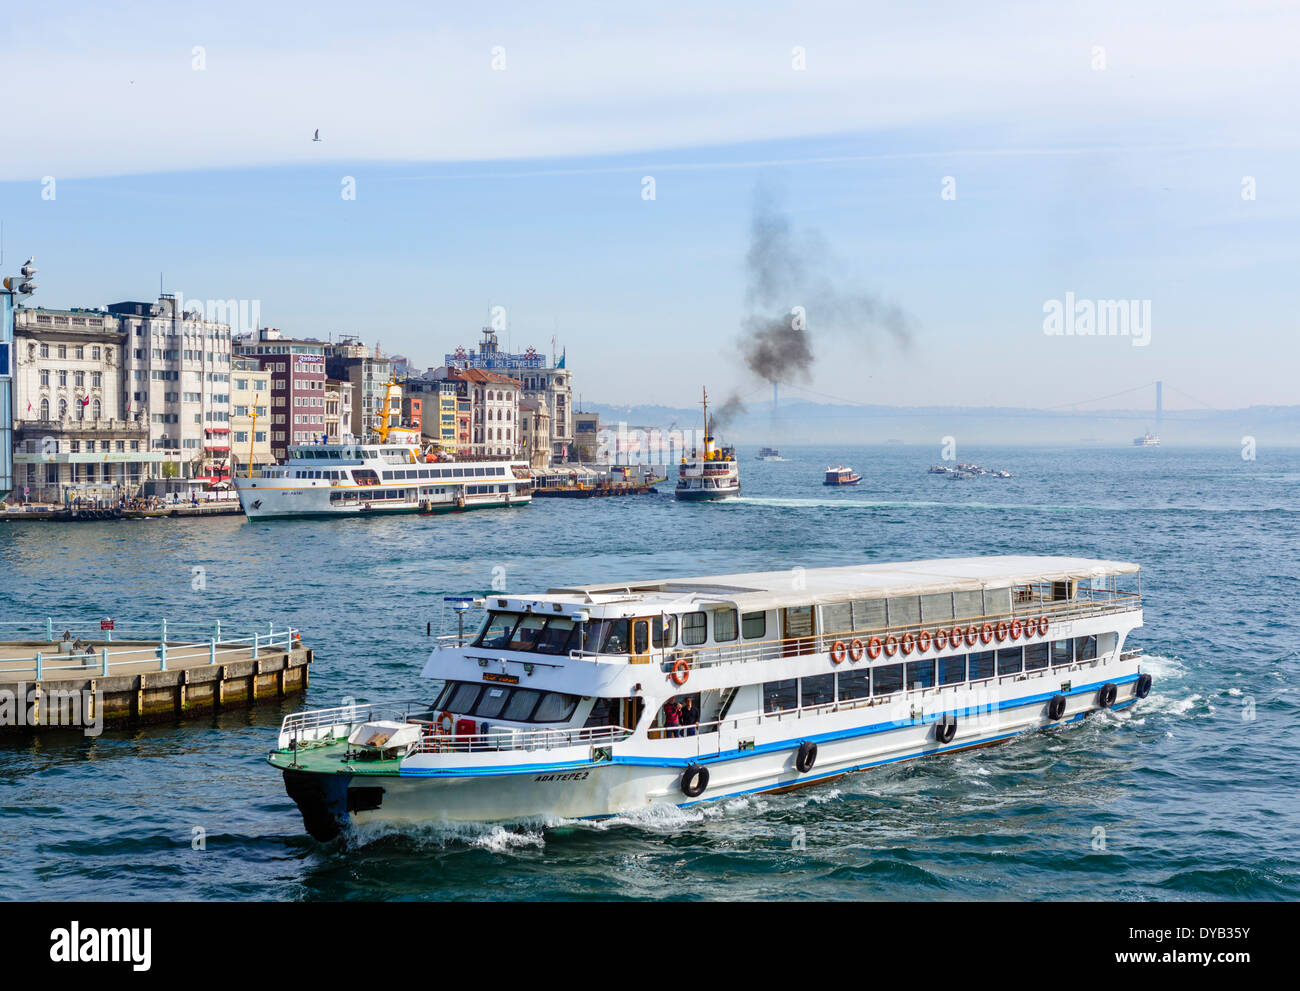 View from the Galata Bridge of boats on the Golden Horn looking towards the Bosphorus, Istanbul, Turkey Stock Photo